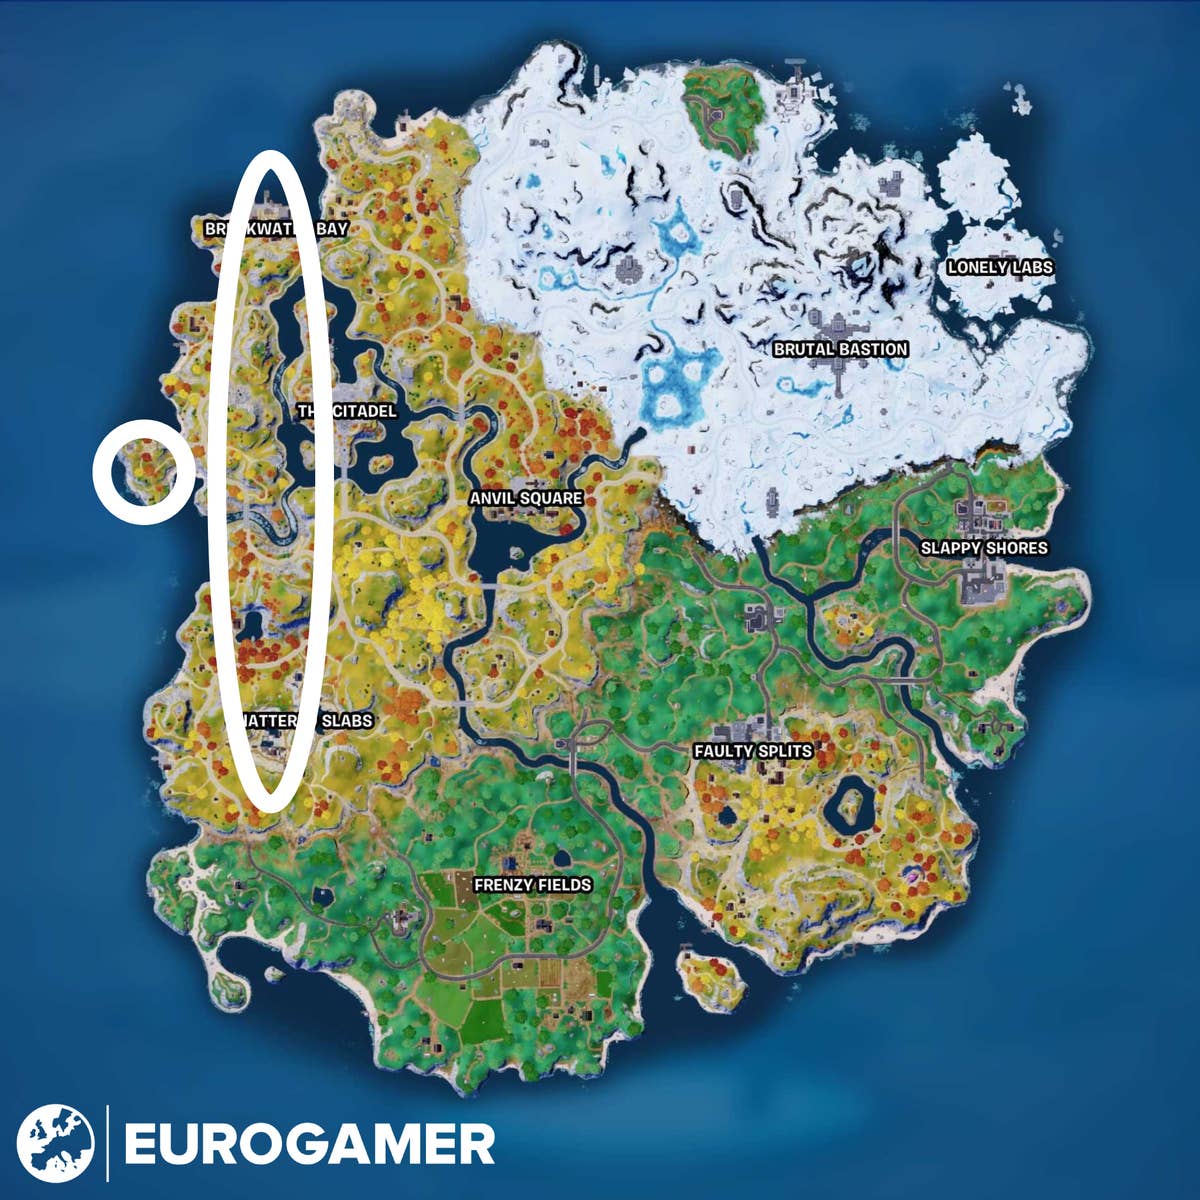 You can take me to moisty mire, but not loot lake : r/FortNiteBR